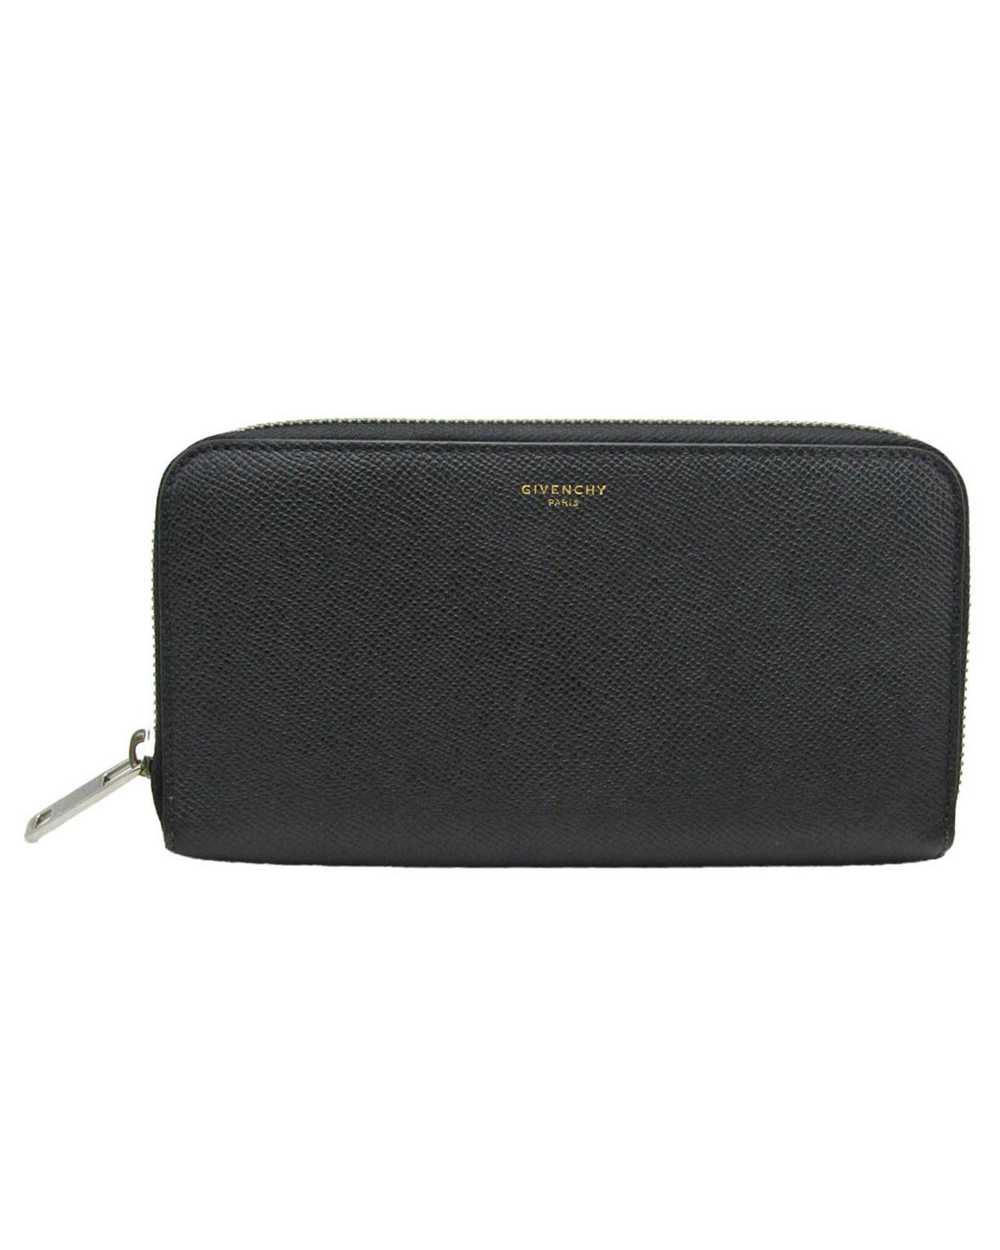 Givenchy Black Leather Long Wallet by Luxury Desi… - image 1